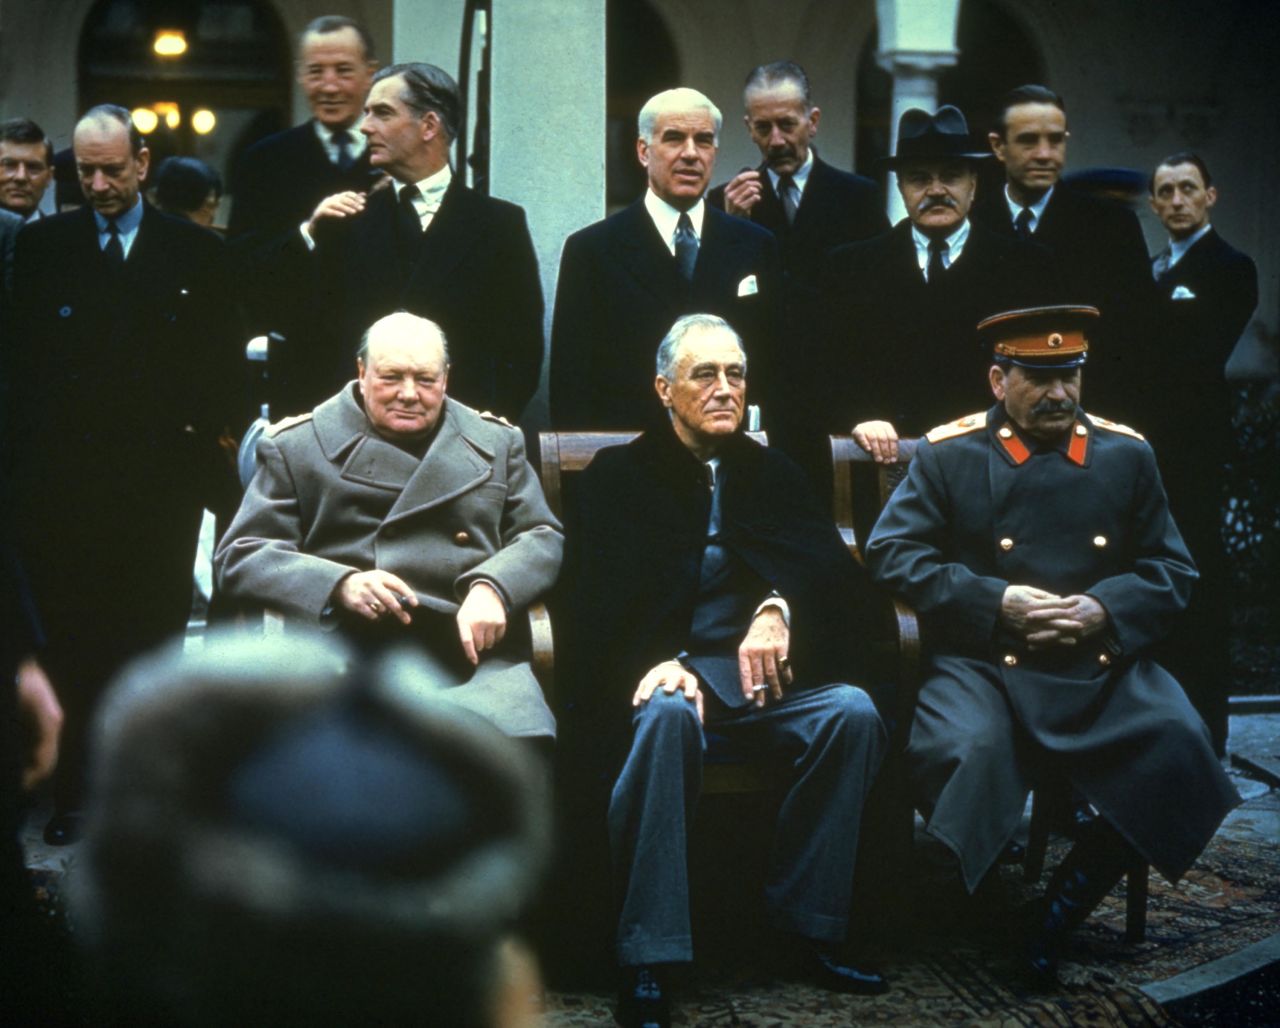 From left, Churchill, Roosevelt and Stalin attend the Yalta Conference in the Soviet Union in 1945. They were meeting to talk about a postwar plan for Europe and how it would be reorganized after the fall of Nazi Germany. Today, <a href="https://www.cnn.com/2014/03/14/world/europe/crimea-yalta-history/index.html" target="_blank">many historians conclude that Stalin was the "winner" at Yalta,</a> as much of Eastern Europe would soon fall within the Soviet orbit. Churchill and Roosevelt won no meaningful concessions on Poland, which was already occupied by Soviet troops.